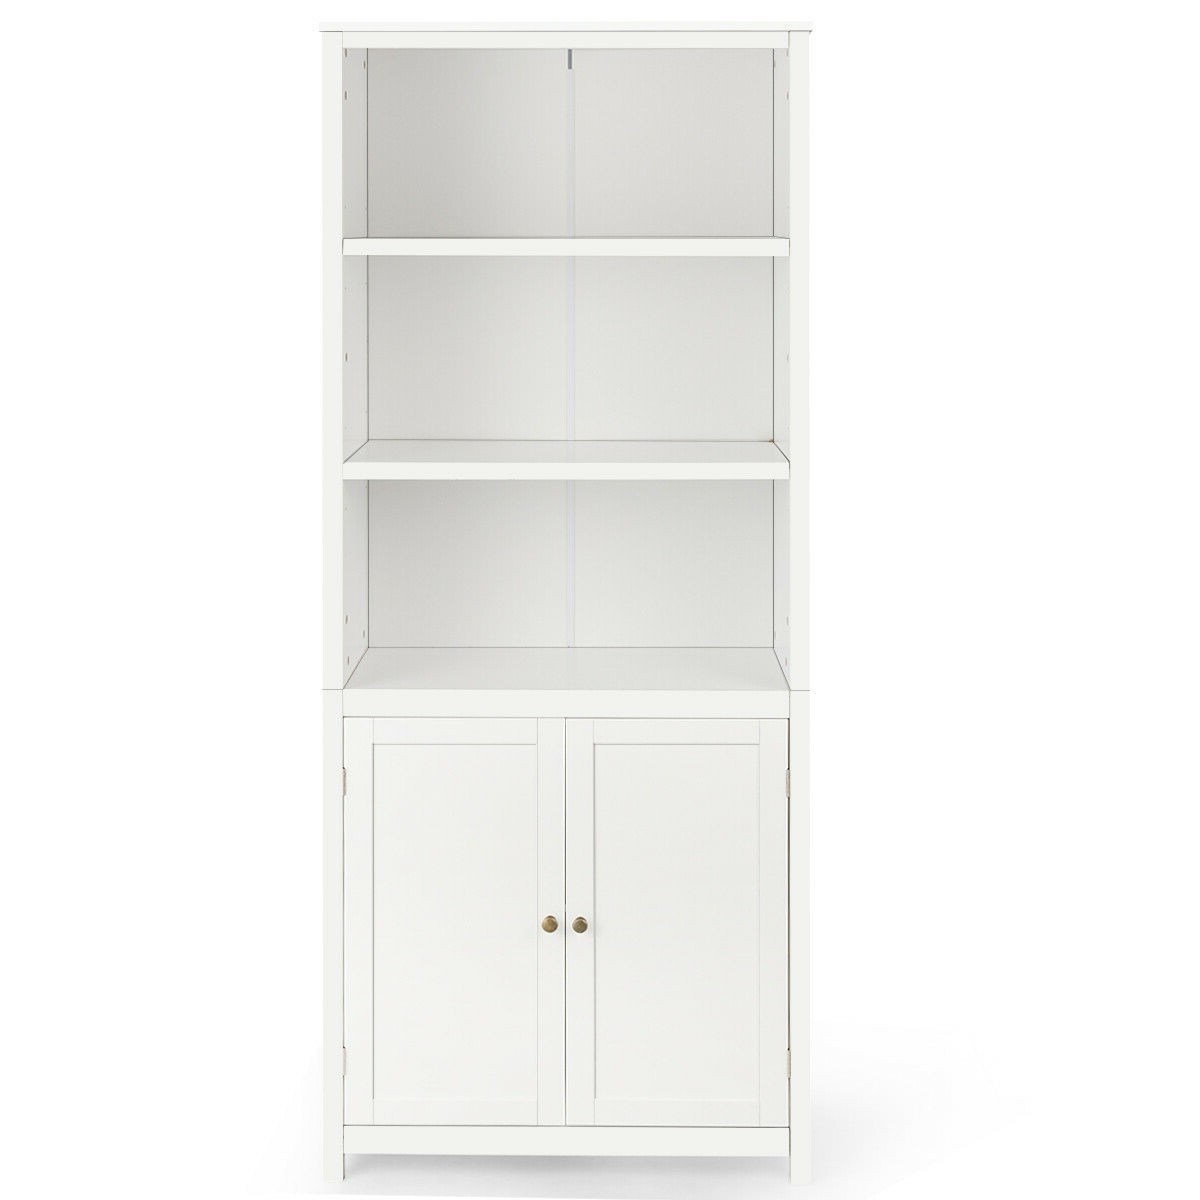 https://ak1.ostkcdn.com/images/products/is/images/direct/8e1c79cb4f5c60ab83a89a8f0f5bb458f730d5de/White-Bathroom-Linen-Tower-Towel-Storage-Cabinet-with-3-Open-Shelves.jpg